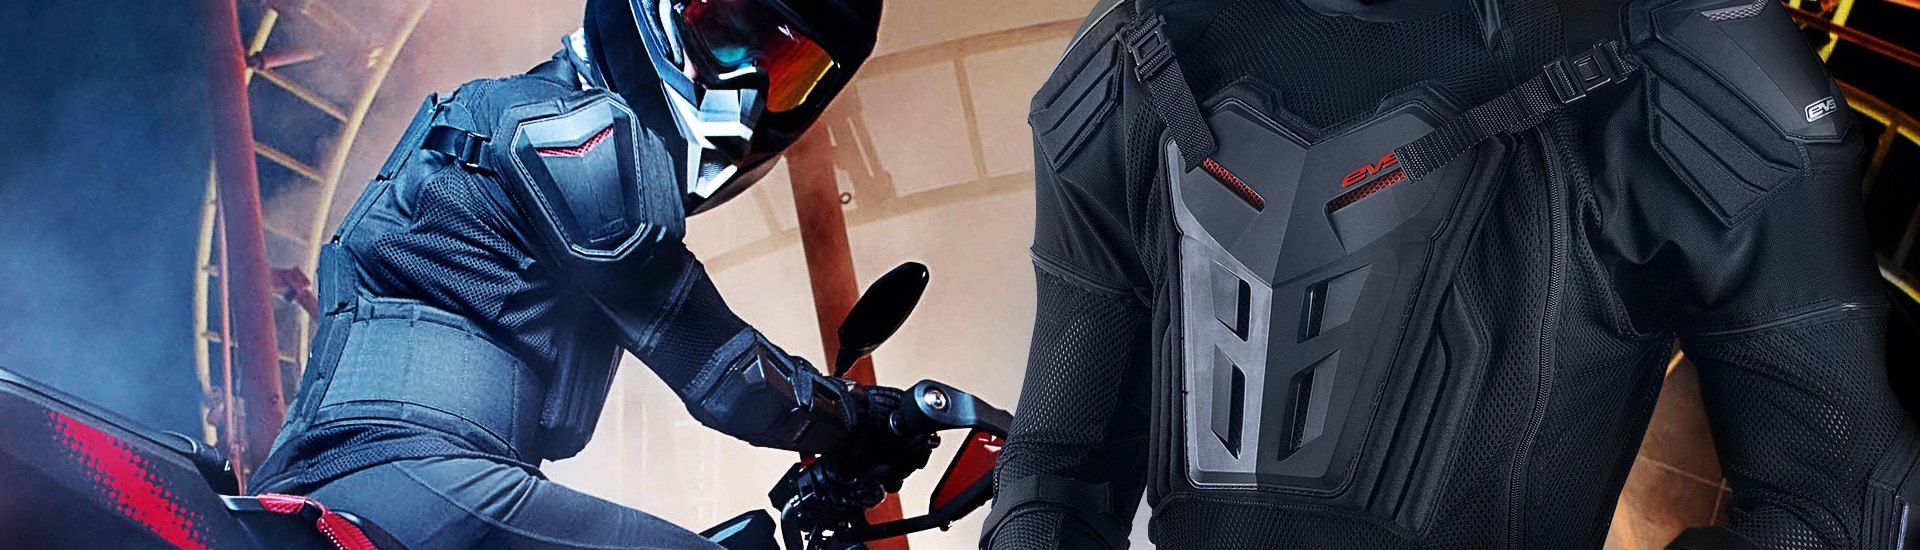 Motorcycle Body Armor & Protection